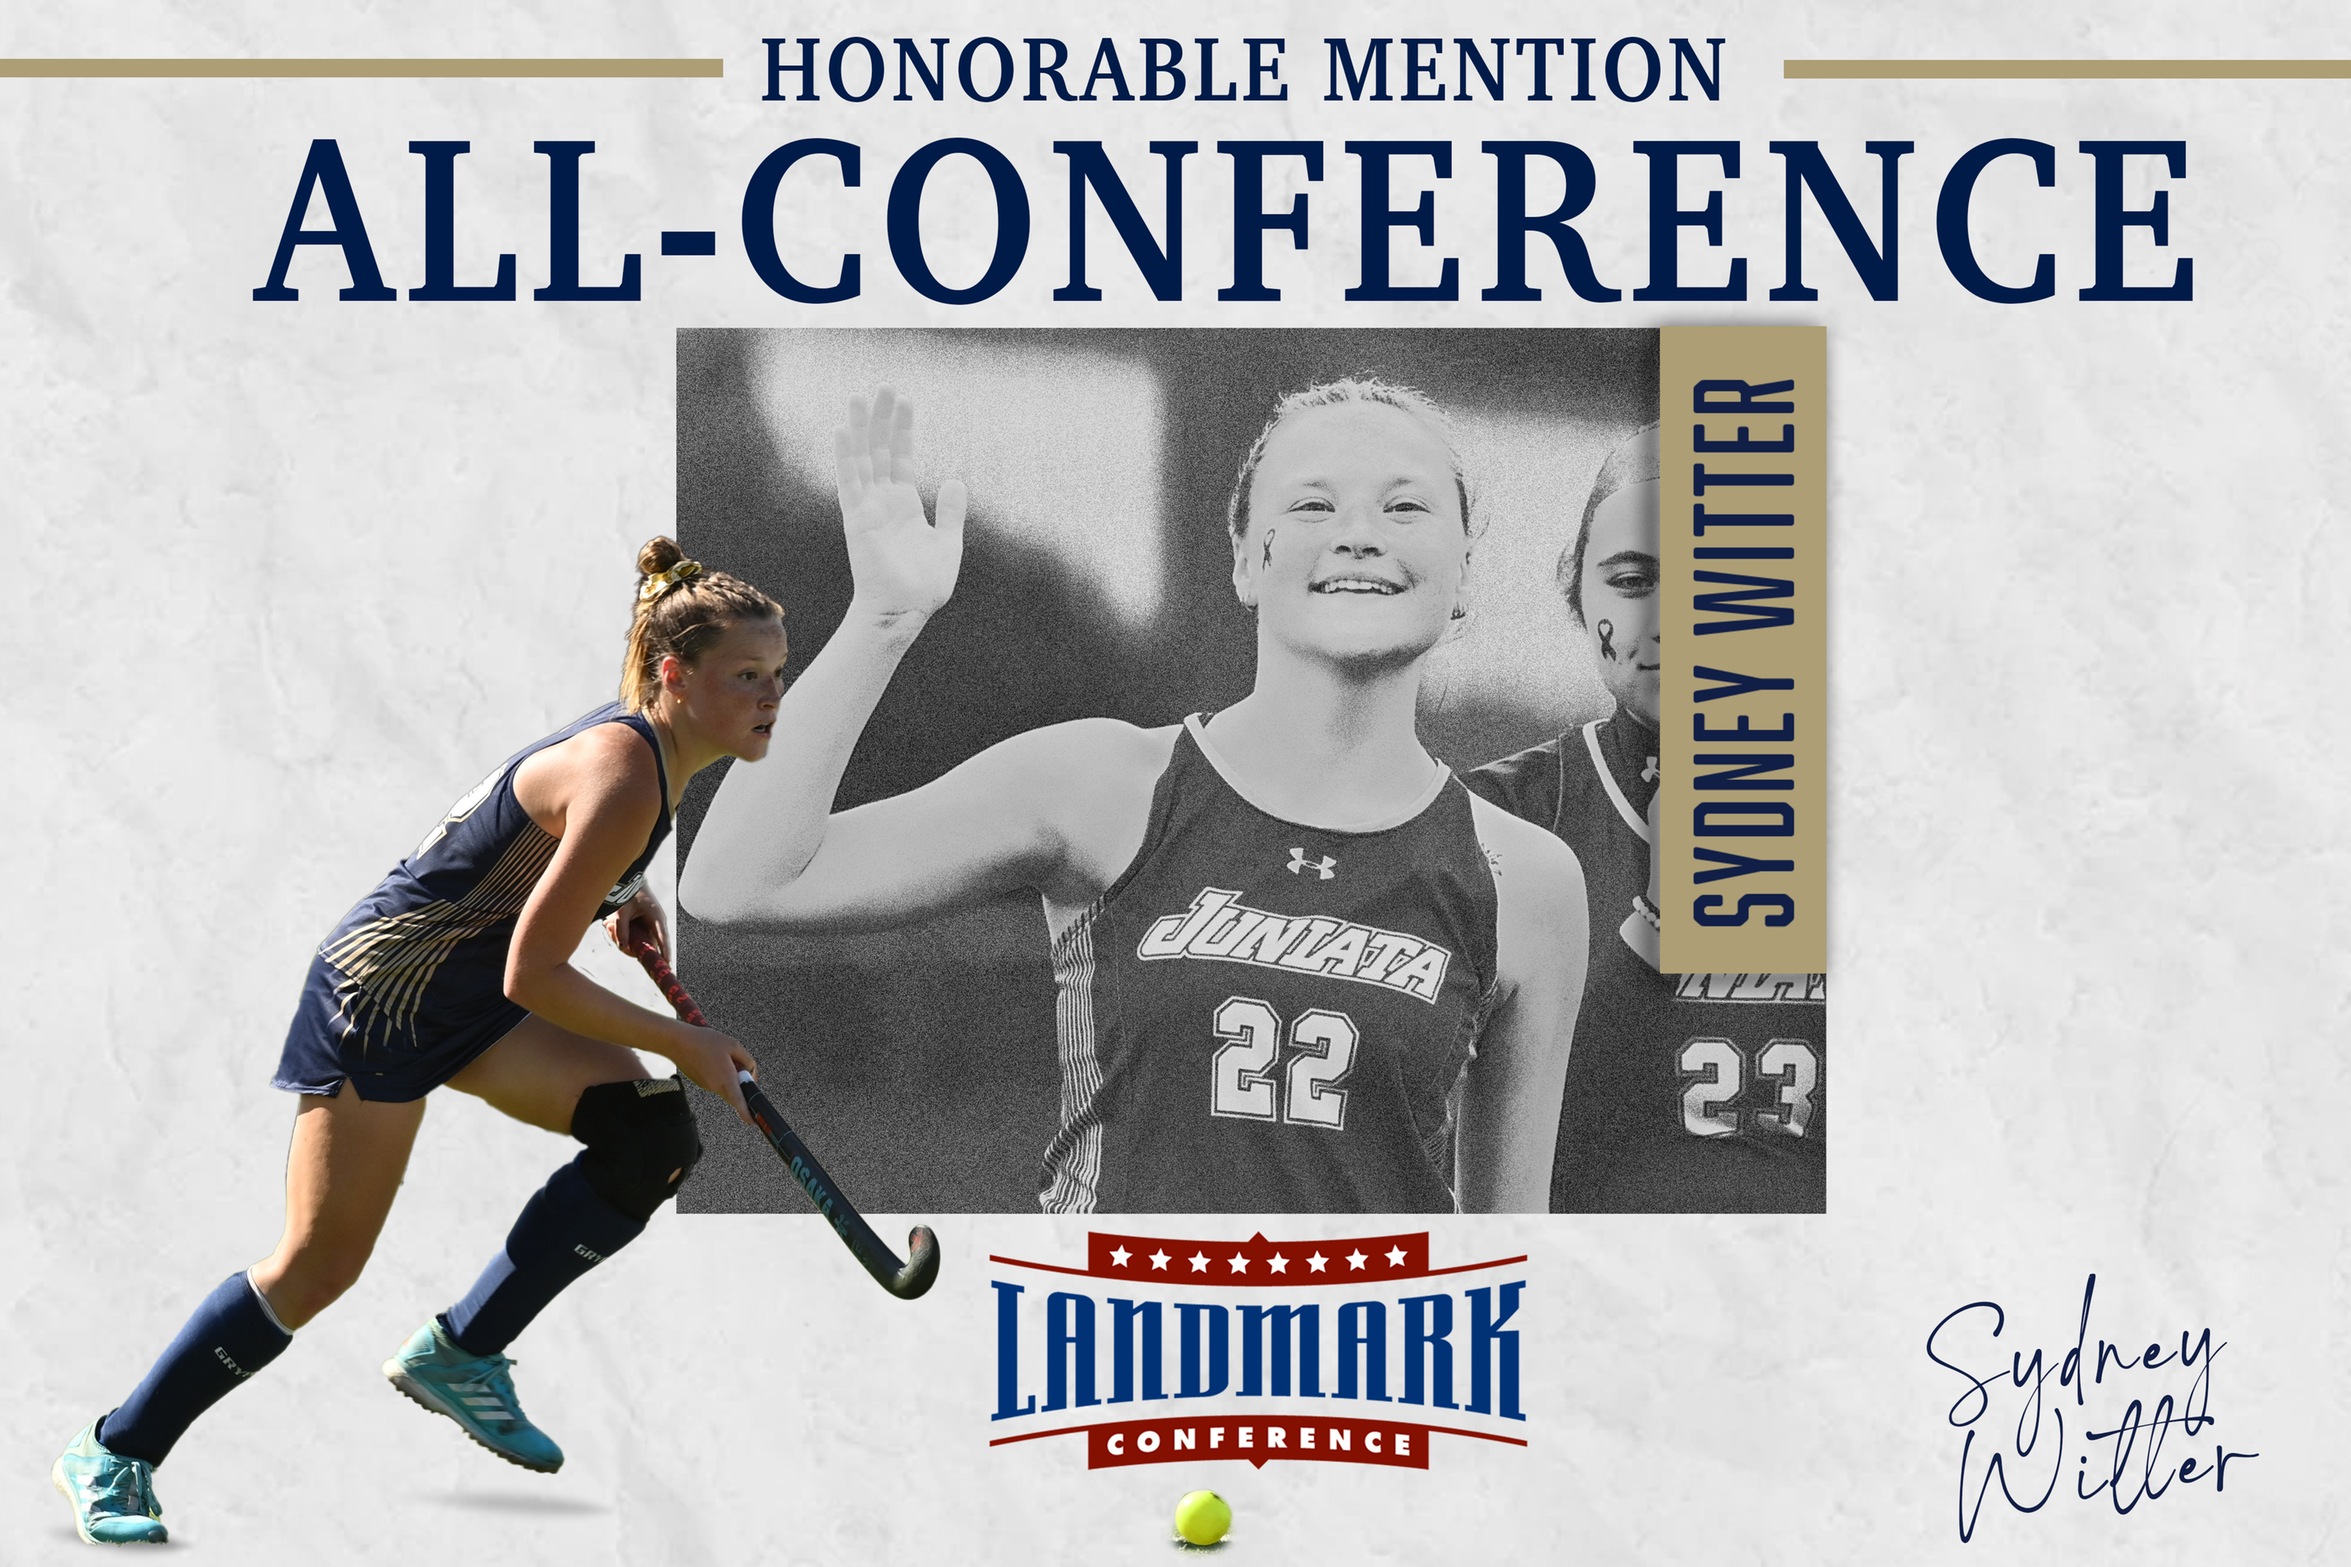 Witter Earns Landmark All-Conference Honorable Mention Recognition